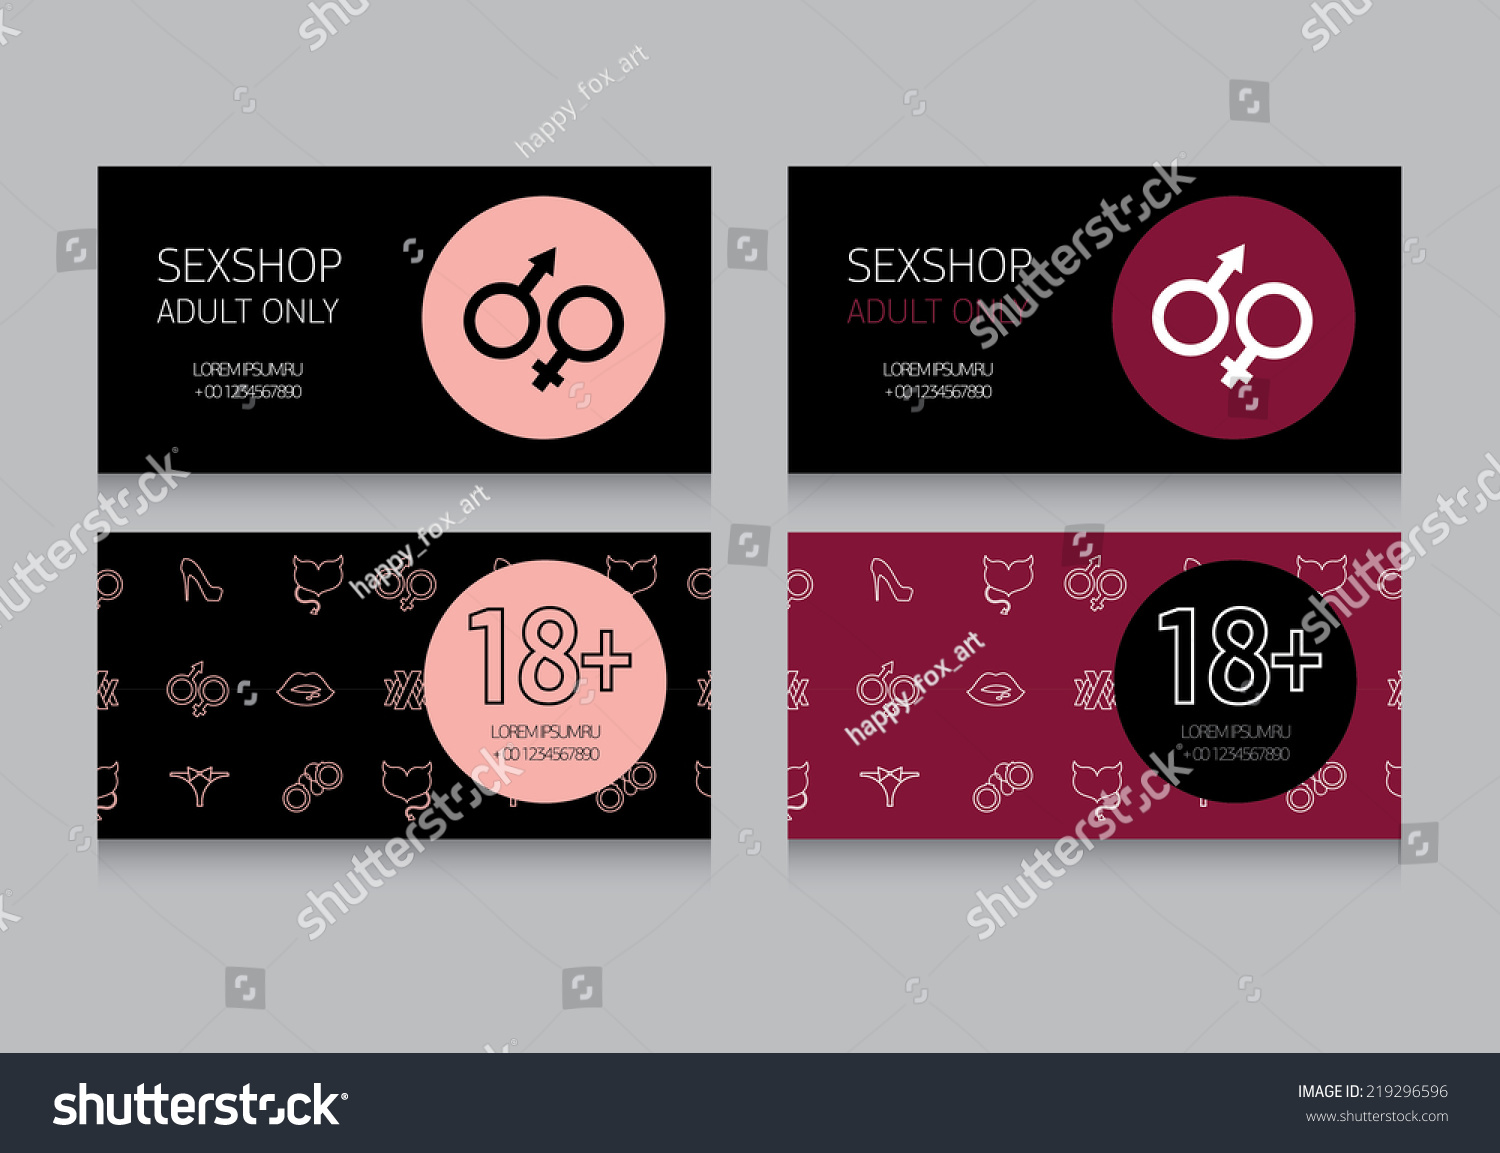 Set Templates Sex Shop Business Cards Stock Vector Royalty Free 219296596 Shutterstock 6062